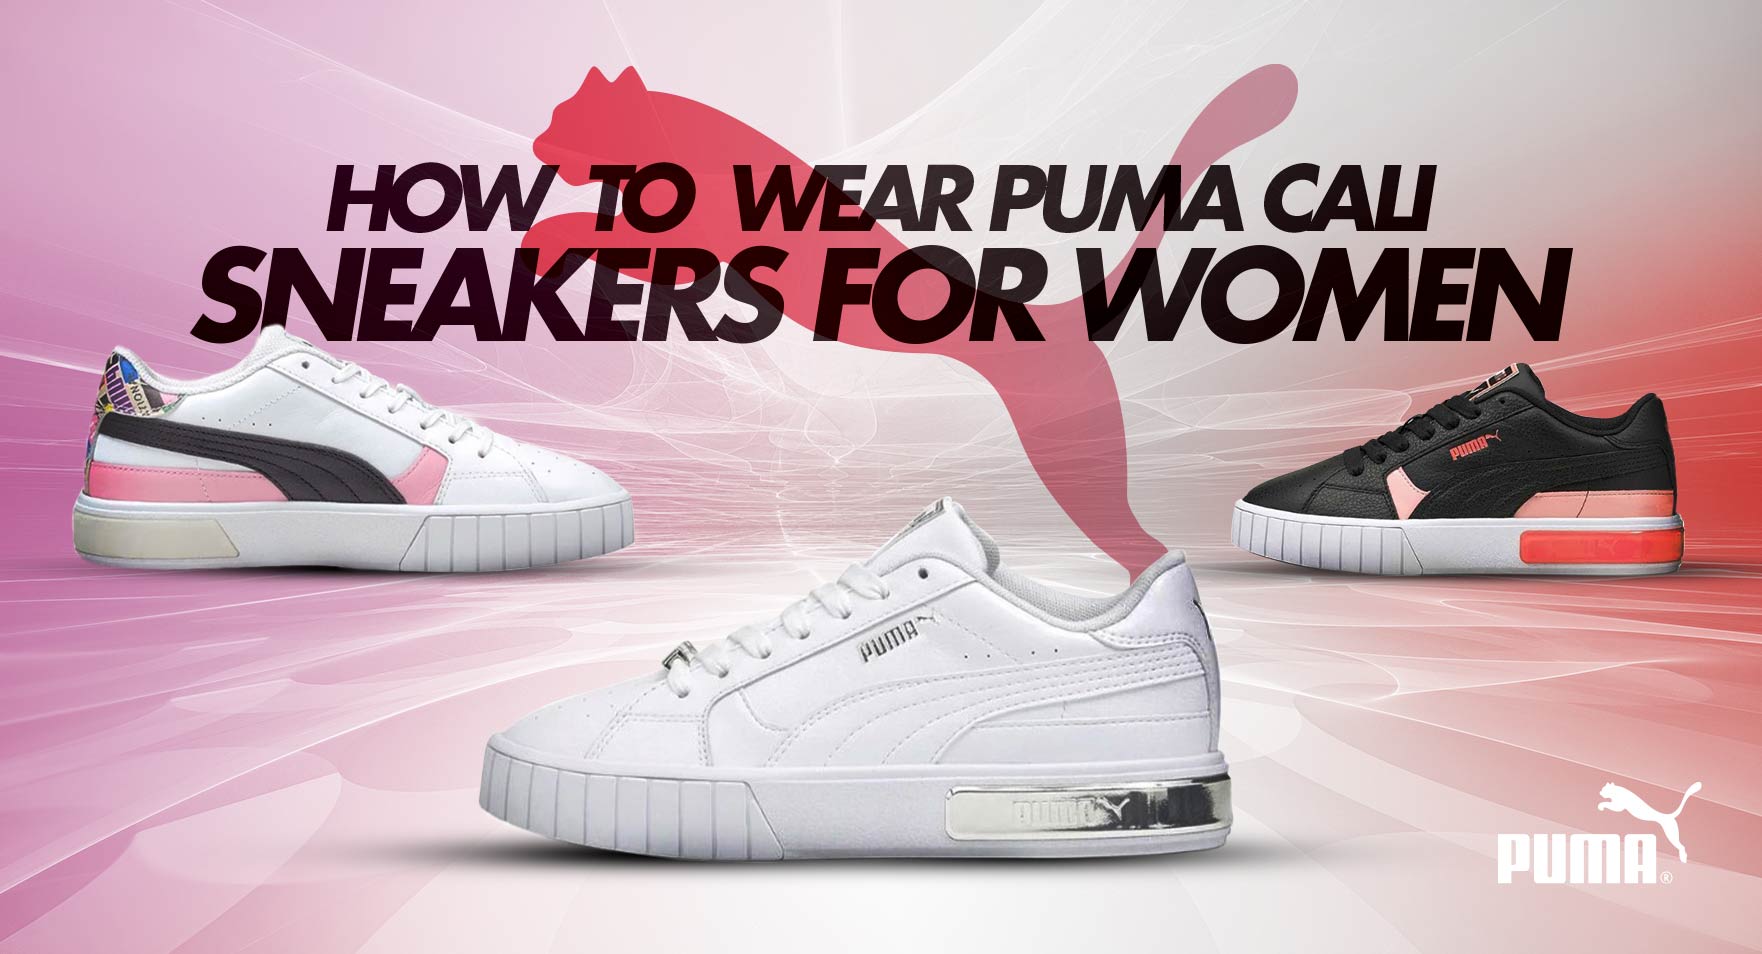 Breakthrough Theirs angel How to Wear PUMA Cali Sneakers for Women - Blog | Side Step